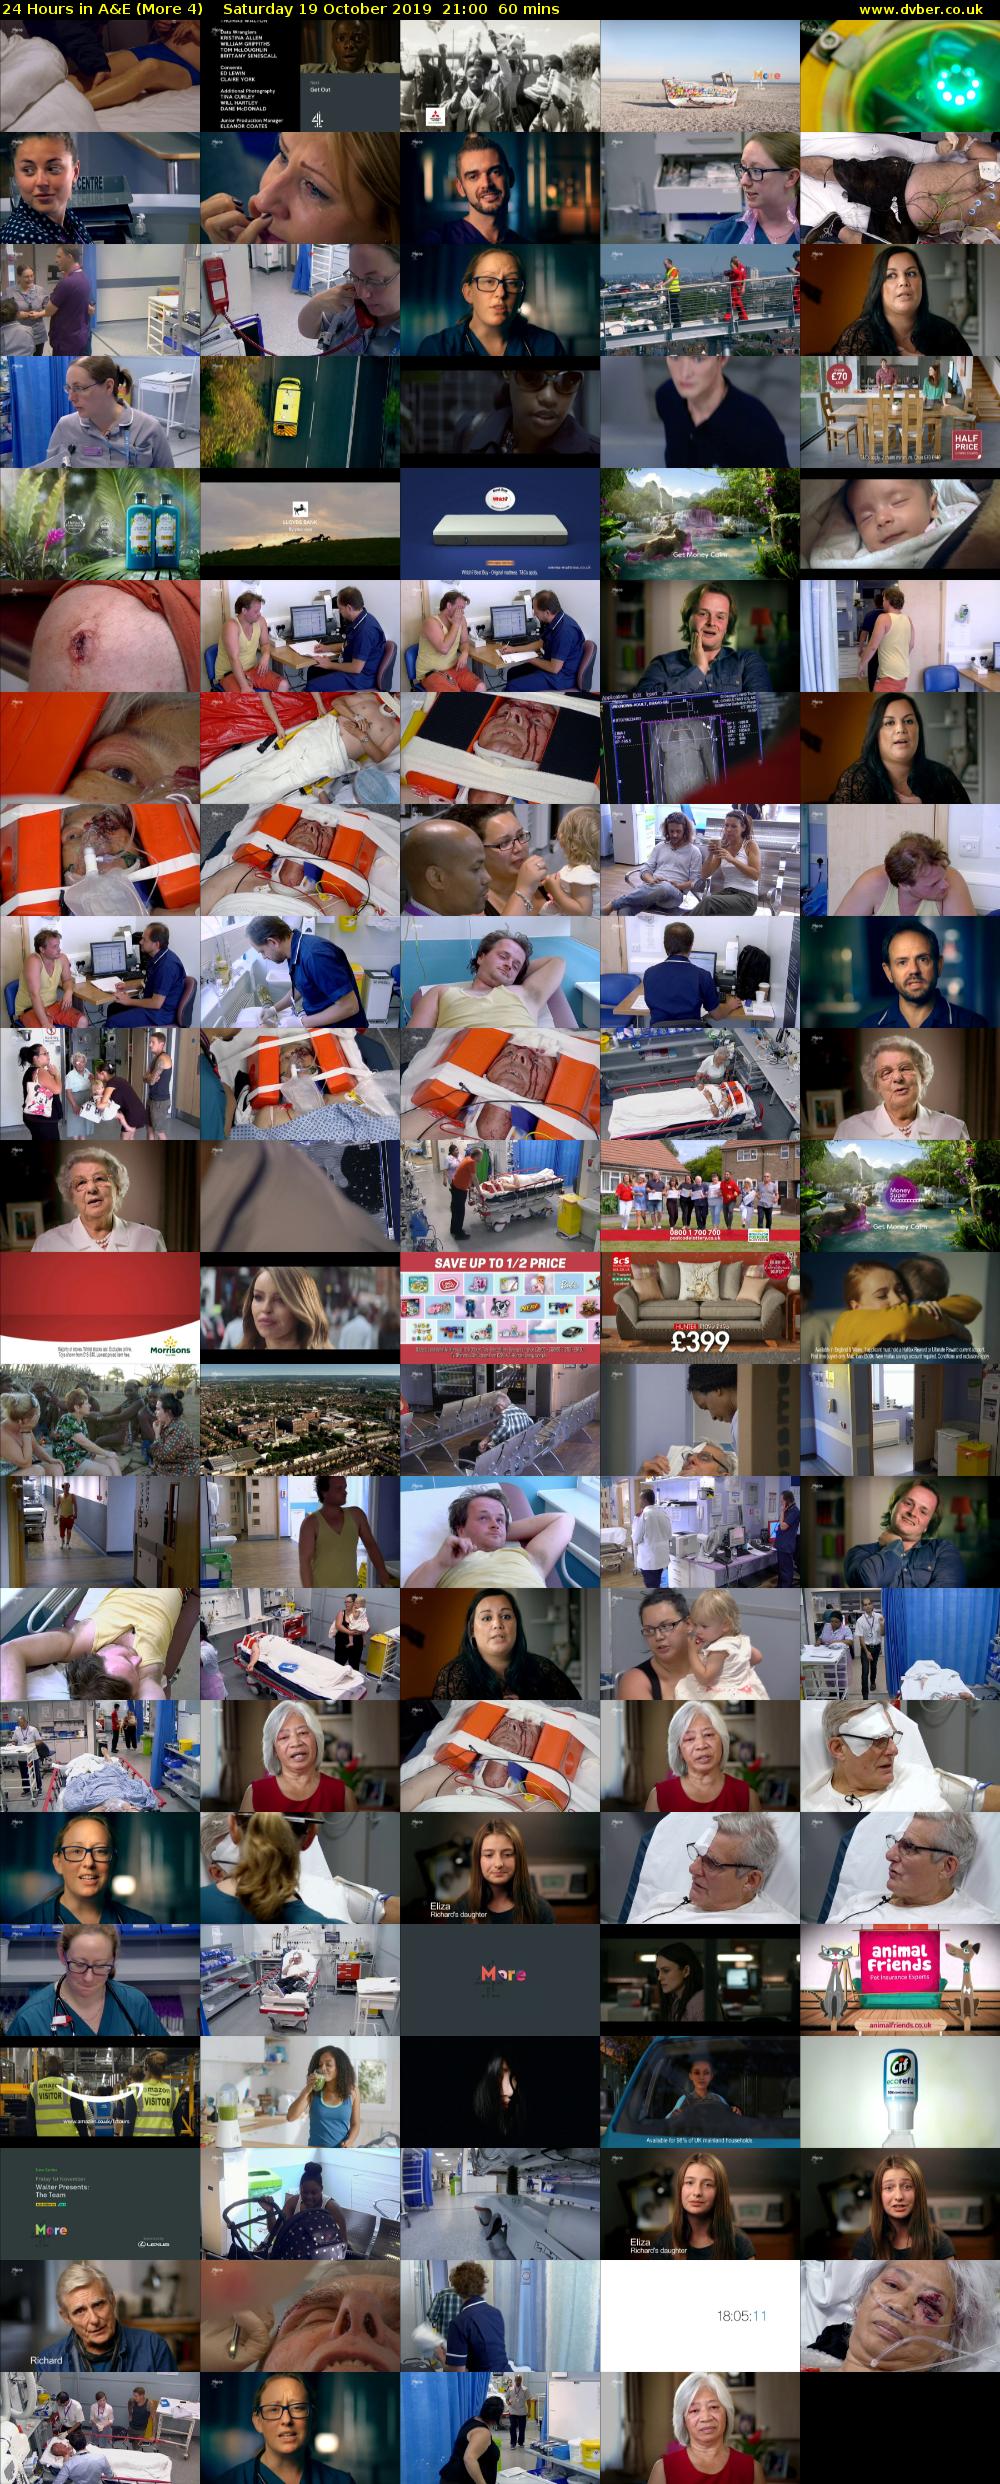 24 Hours in A&E (More 4) Saturday 19 October 2019 21:00 - 22:00